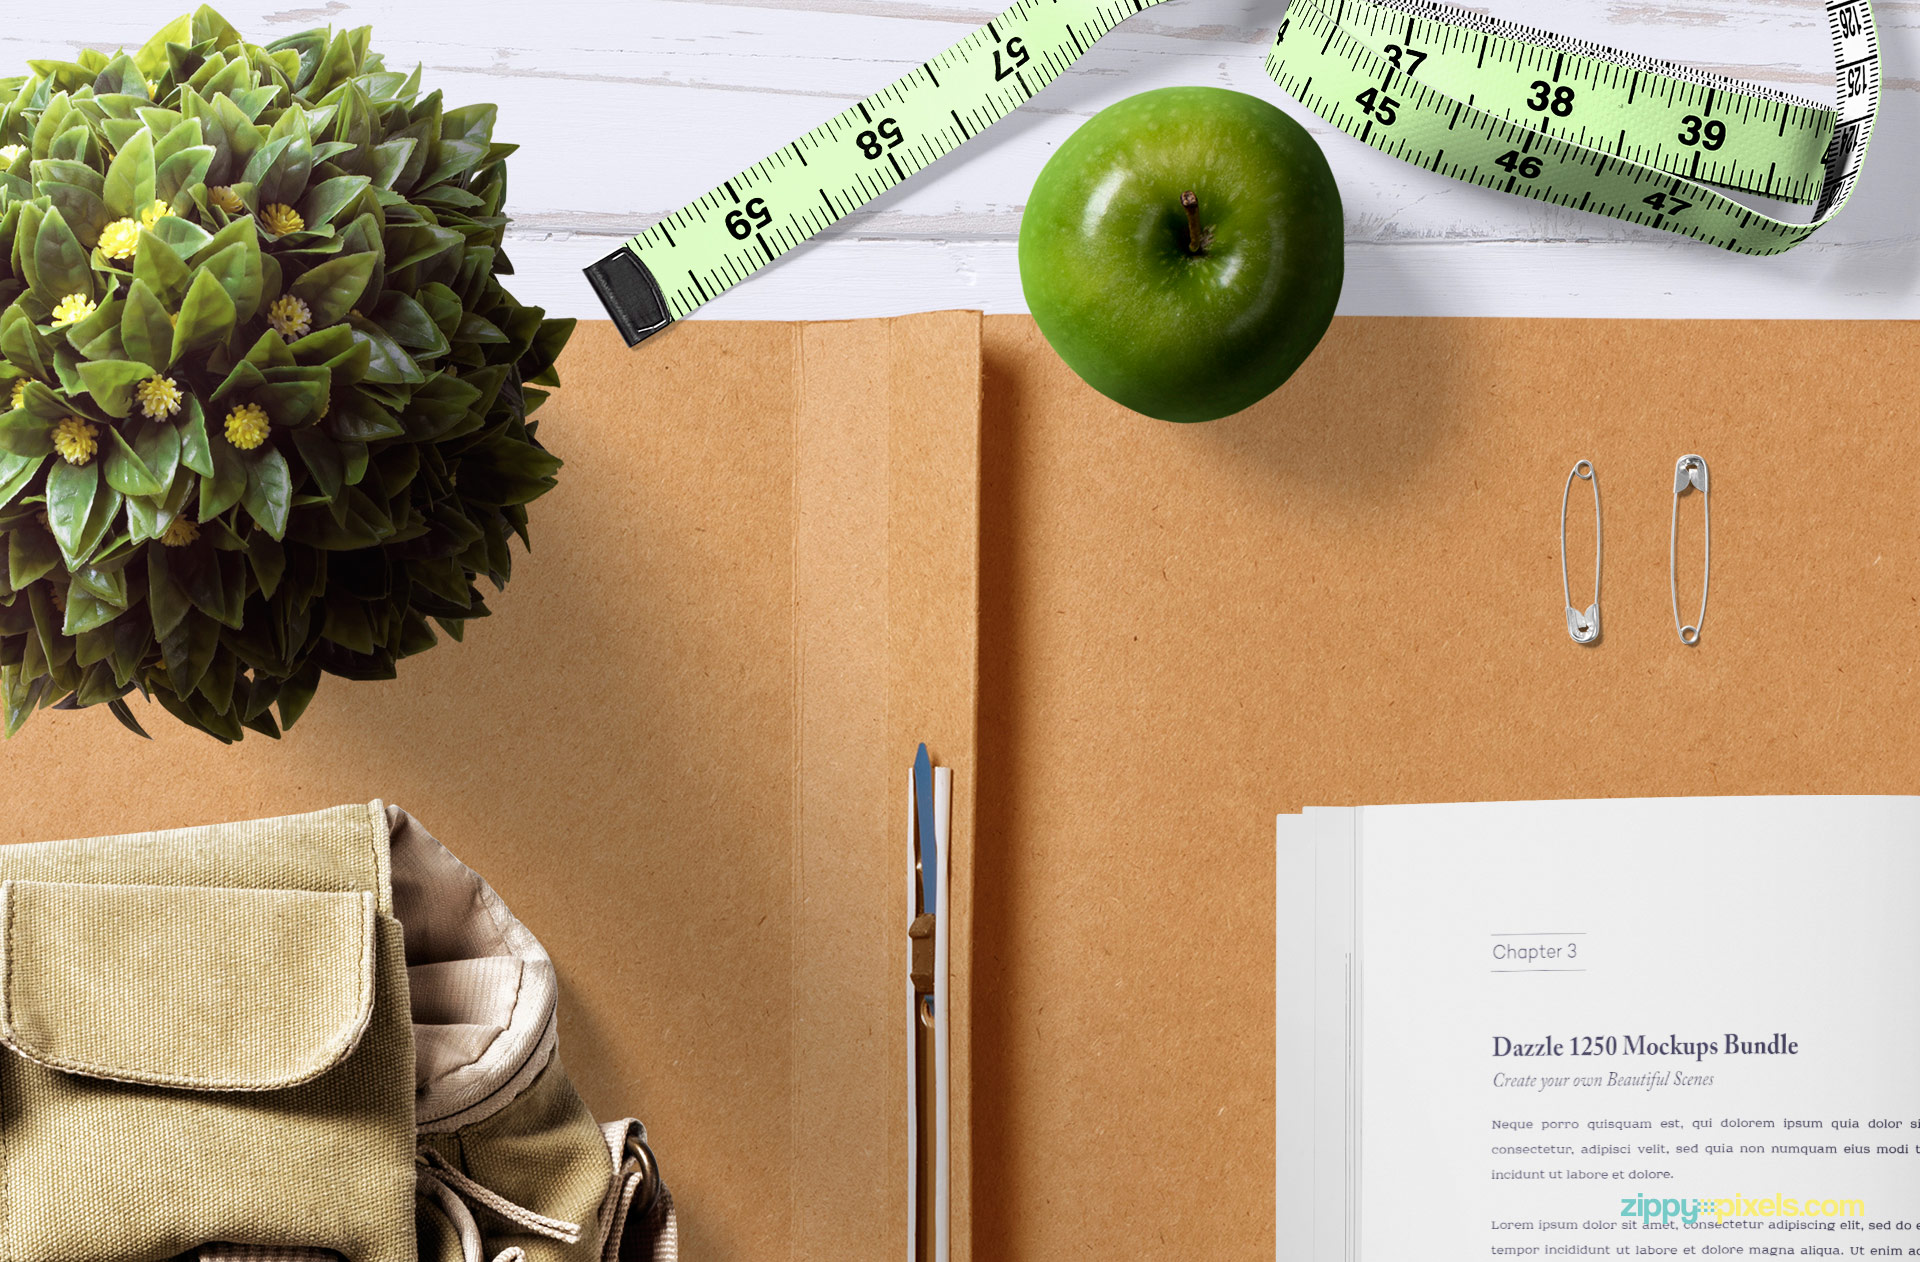 Free mockup scene including apple, plant pot, inches tape and file cover.